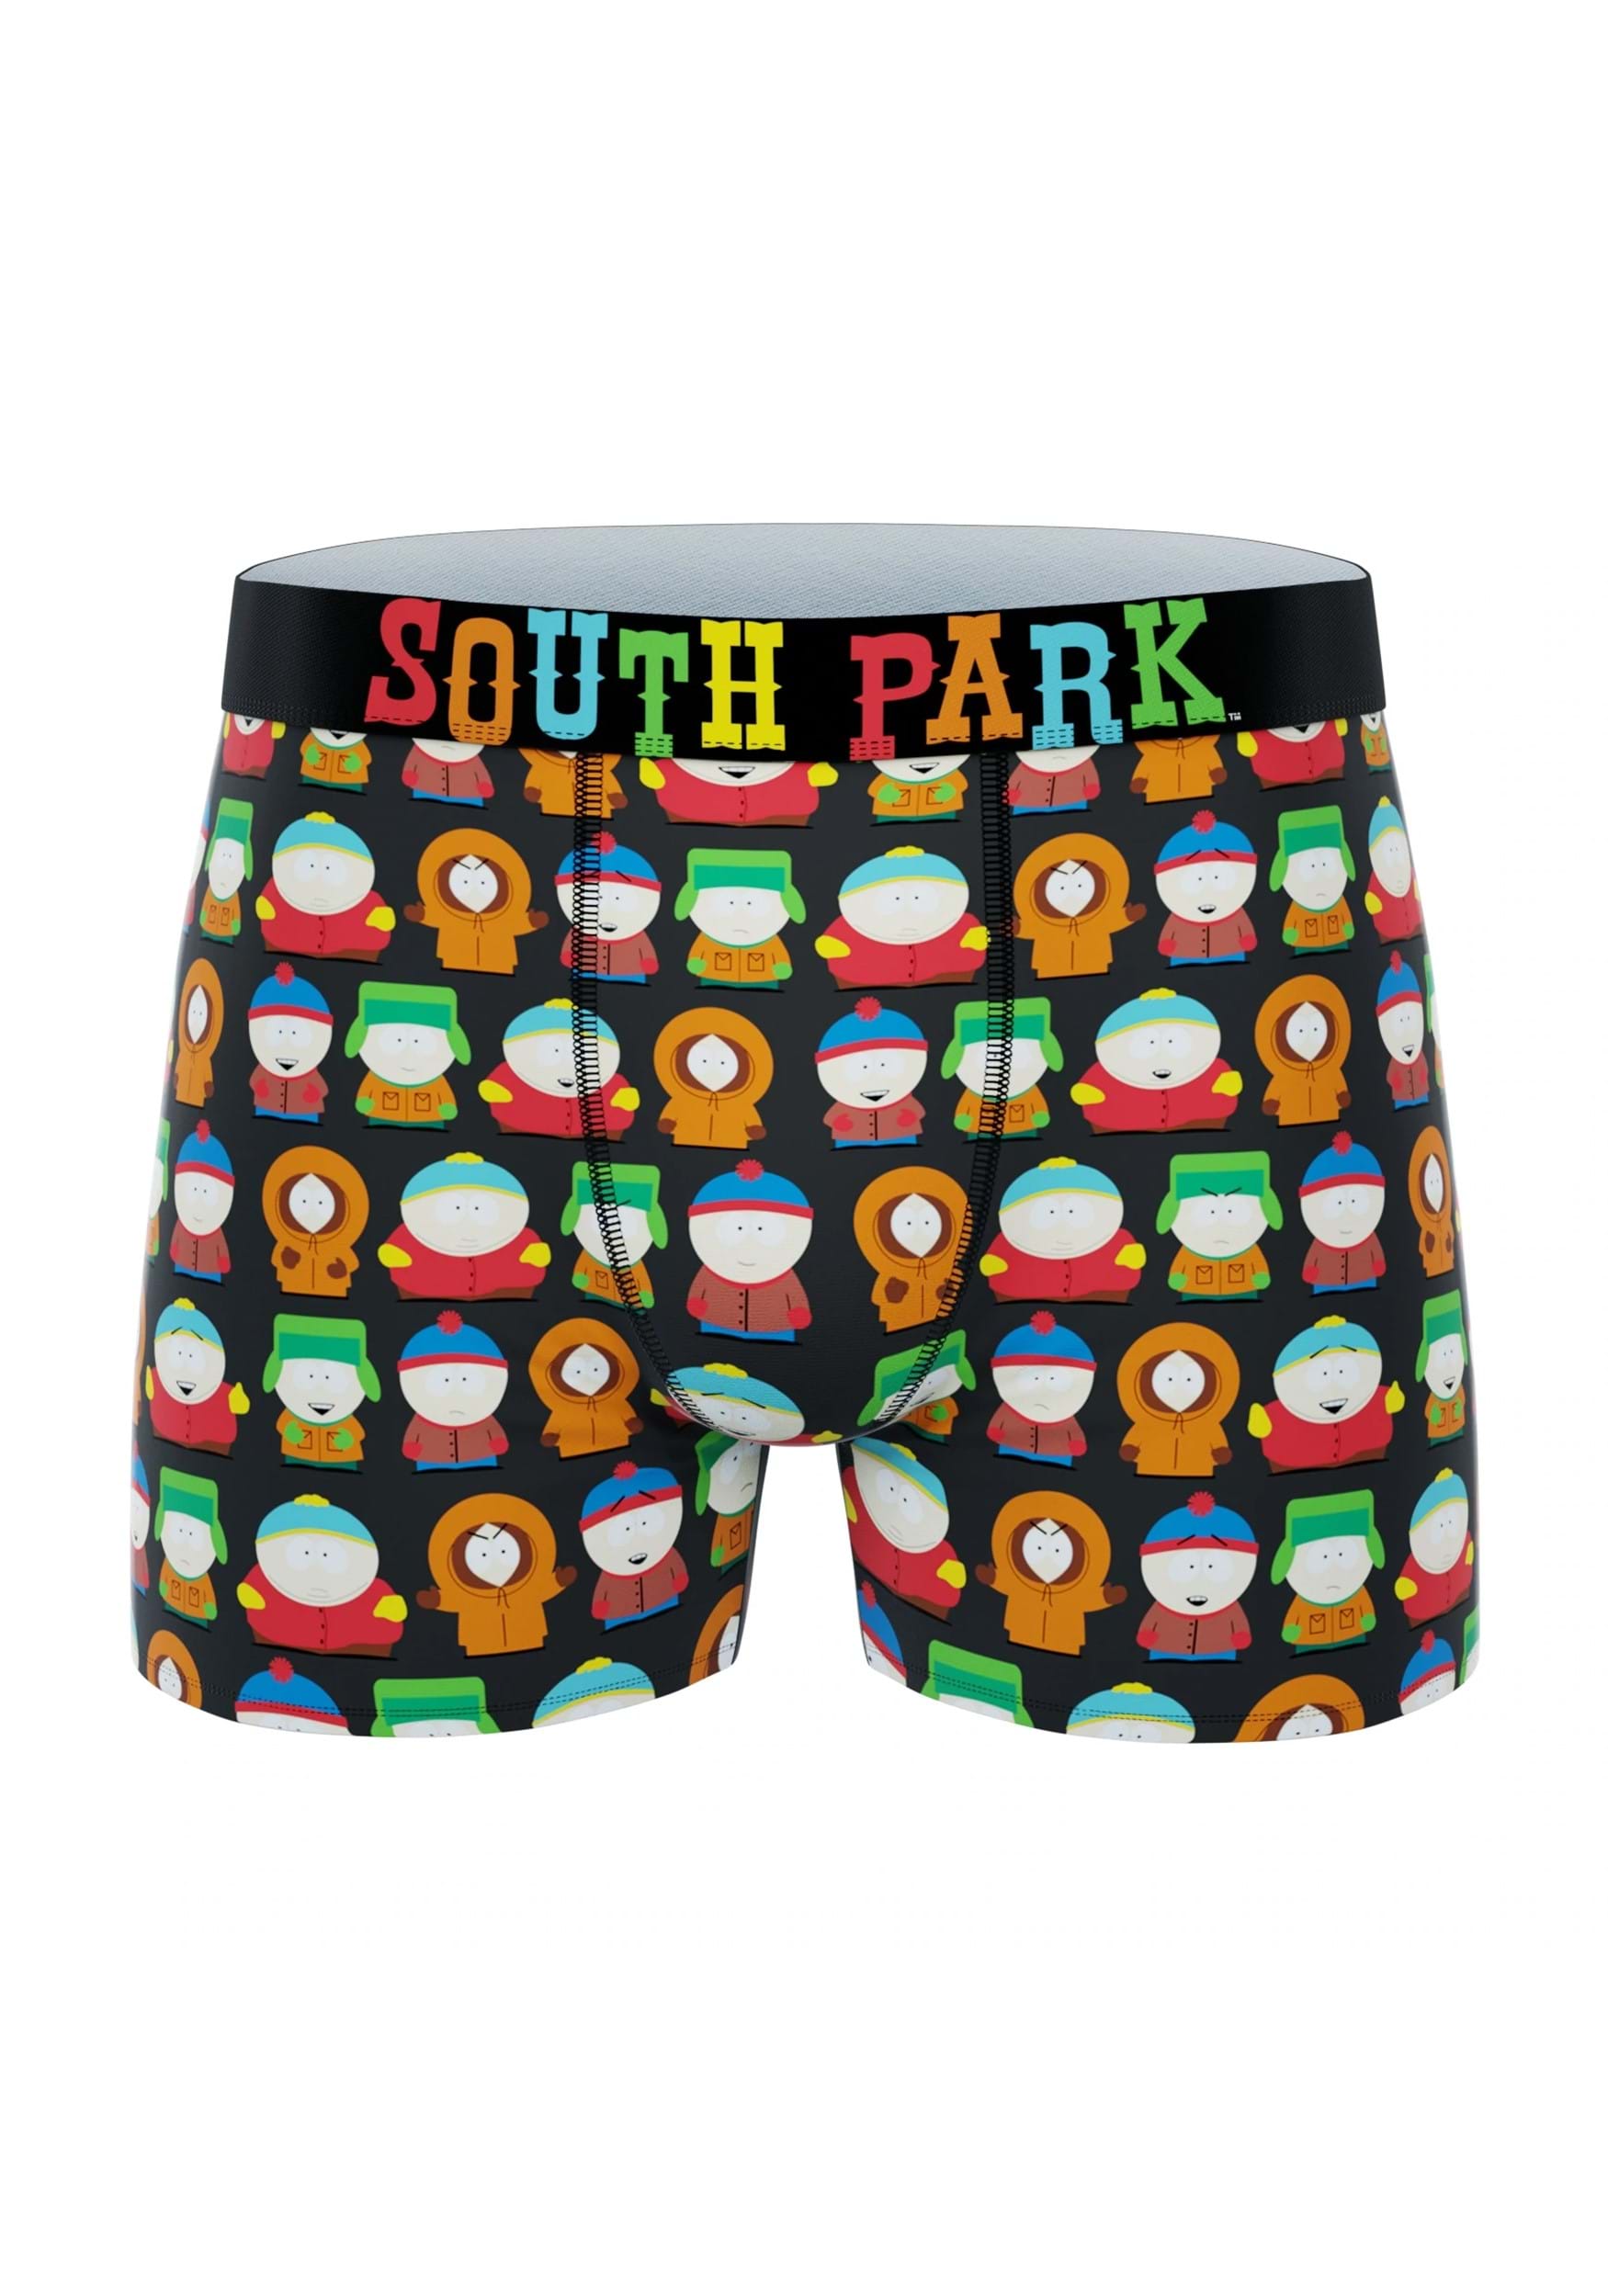 South Park Group Characters Mens Boxer Briefs